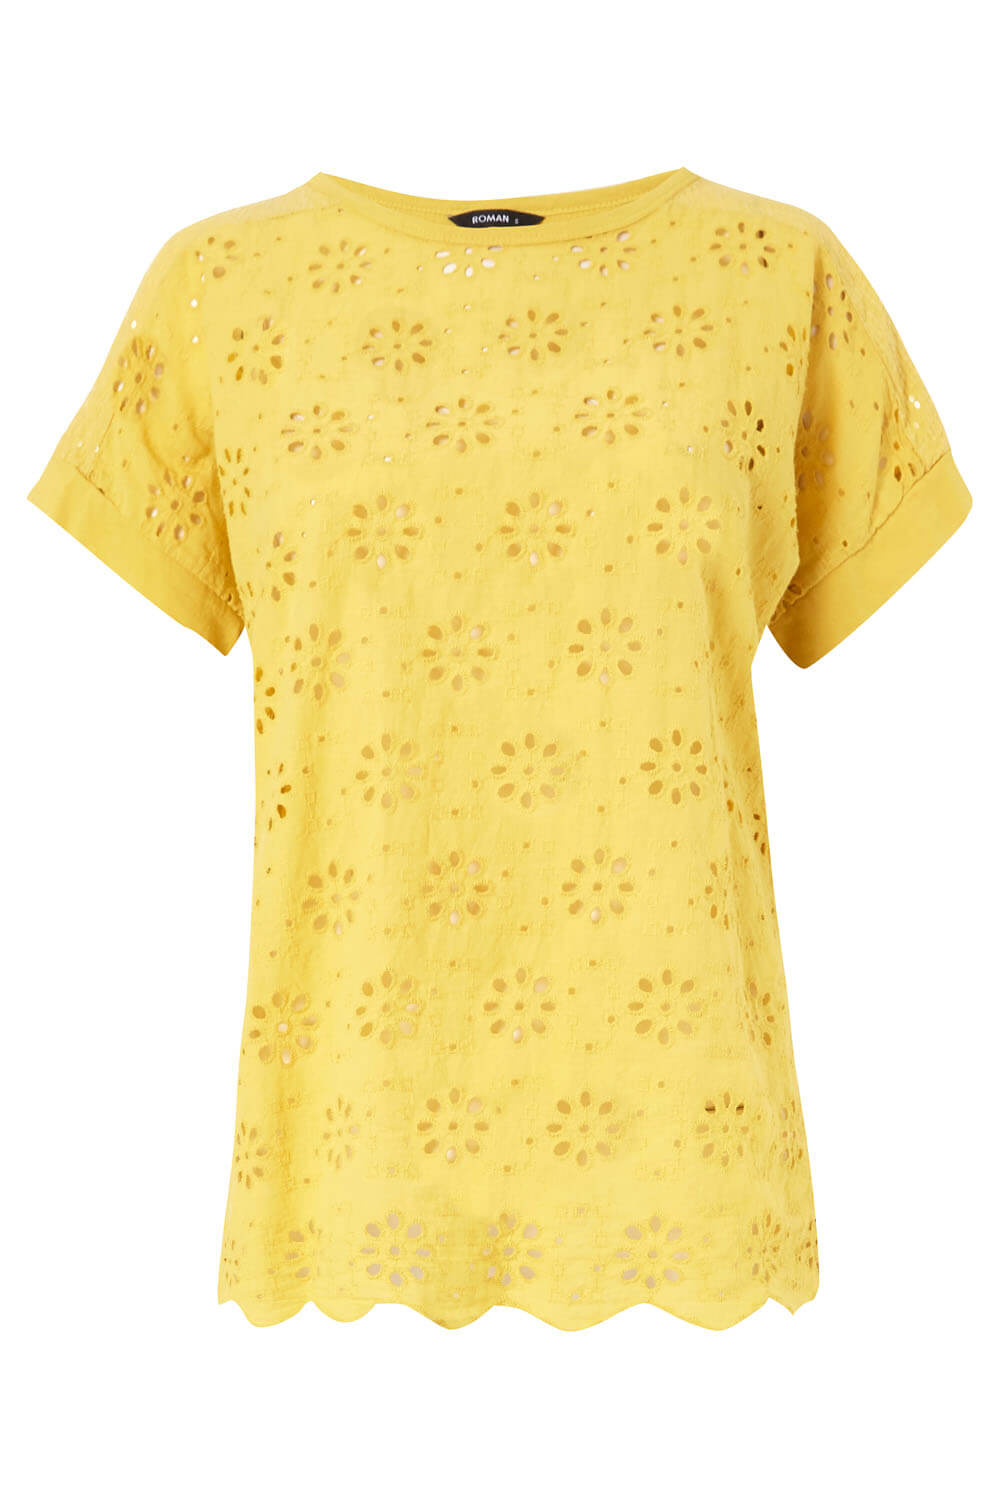 Yellow Broderie and Sequin Top, Image 6 of 6